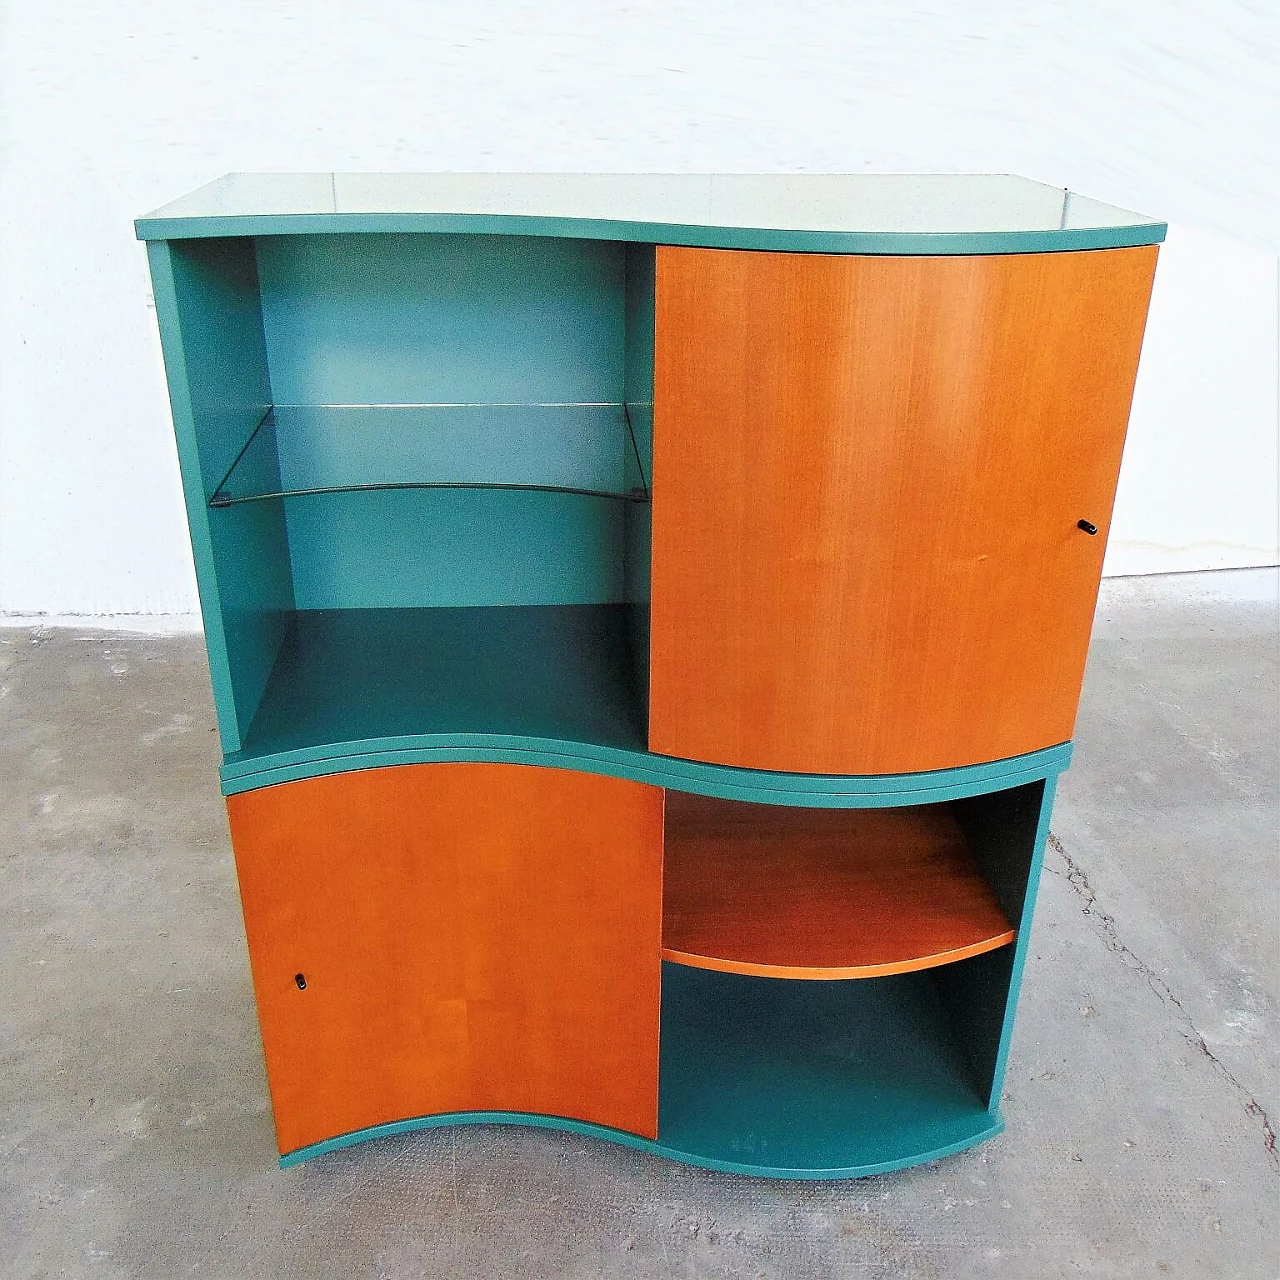 Sideboard Green Satin Lacquer, Doors in Walnut-Stained Cherry, for Roche Bobois, 1990s 1167294